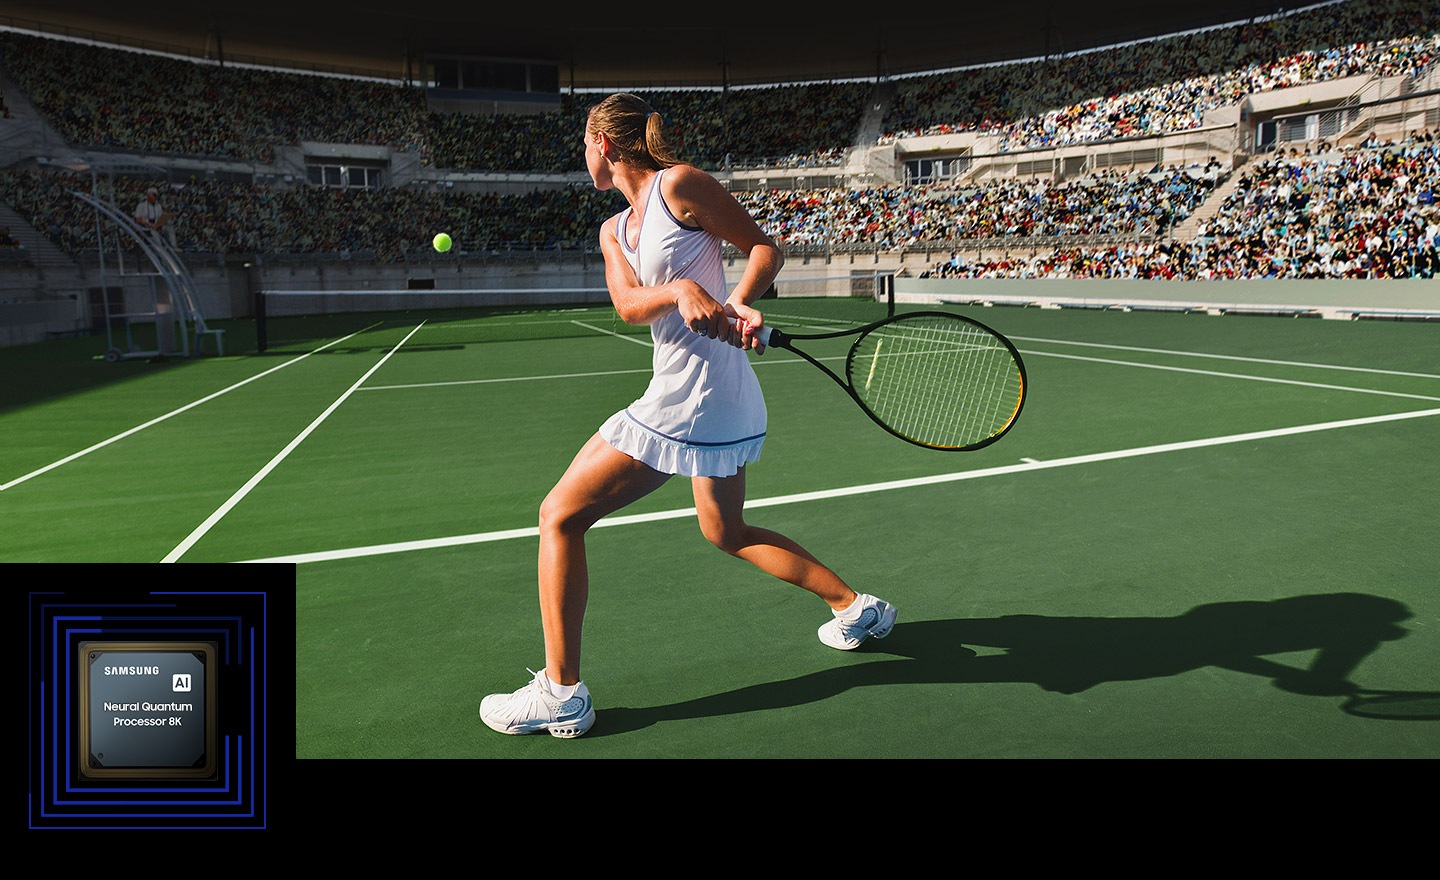 A woman is playing tennis in front of a large crowd. The Neo Quantum Processor 8K is on display in the lower lefthand corner.